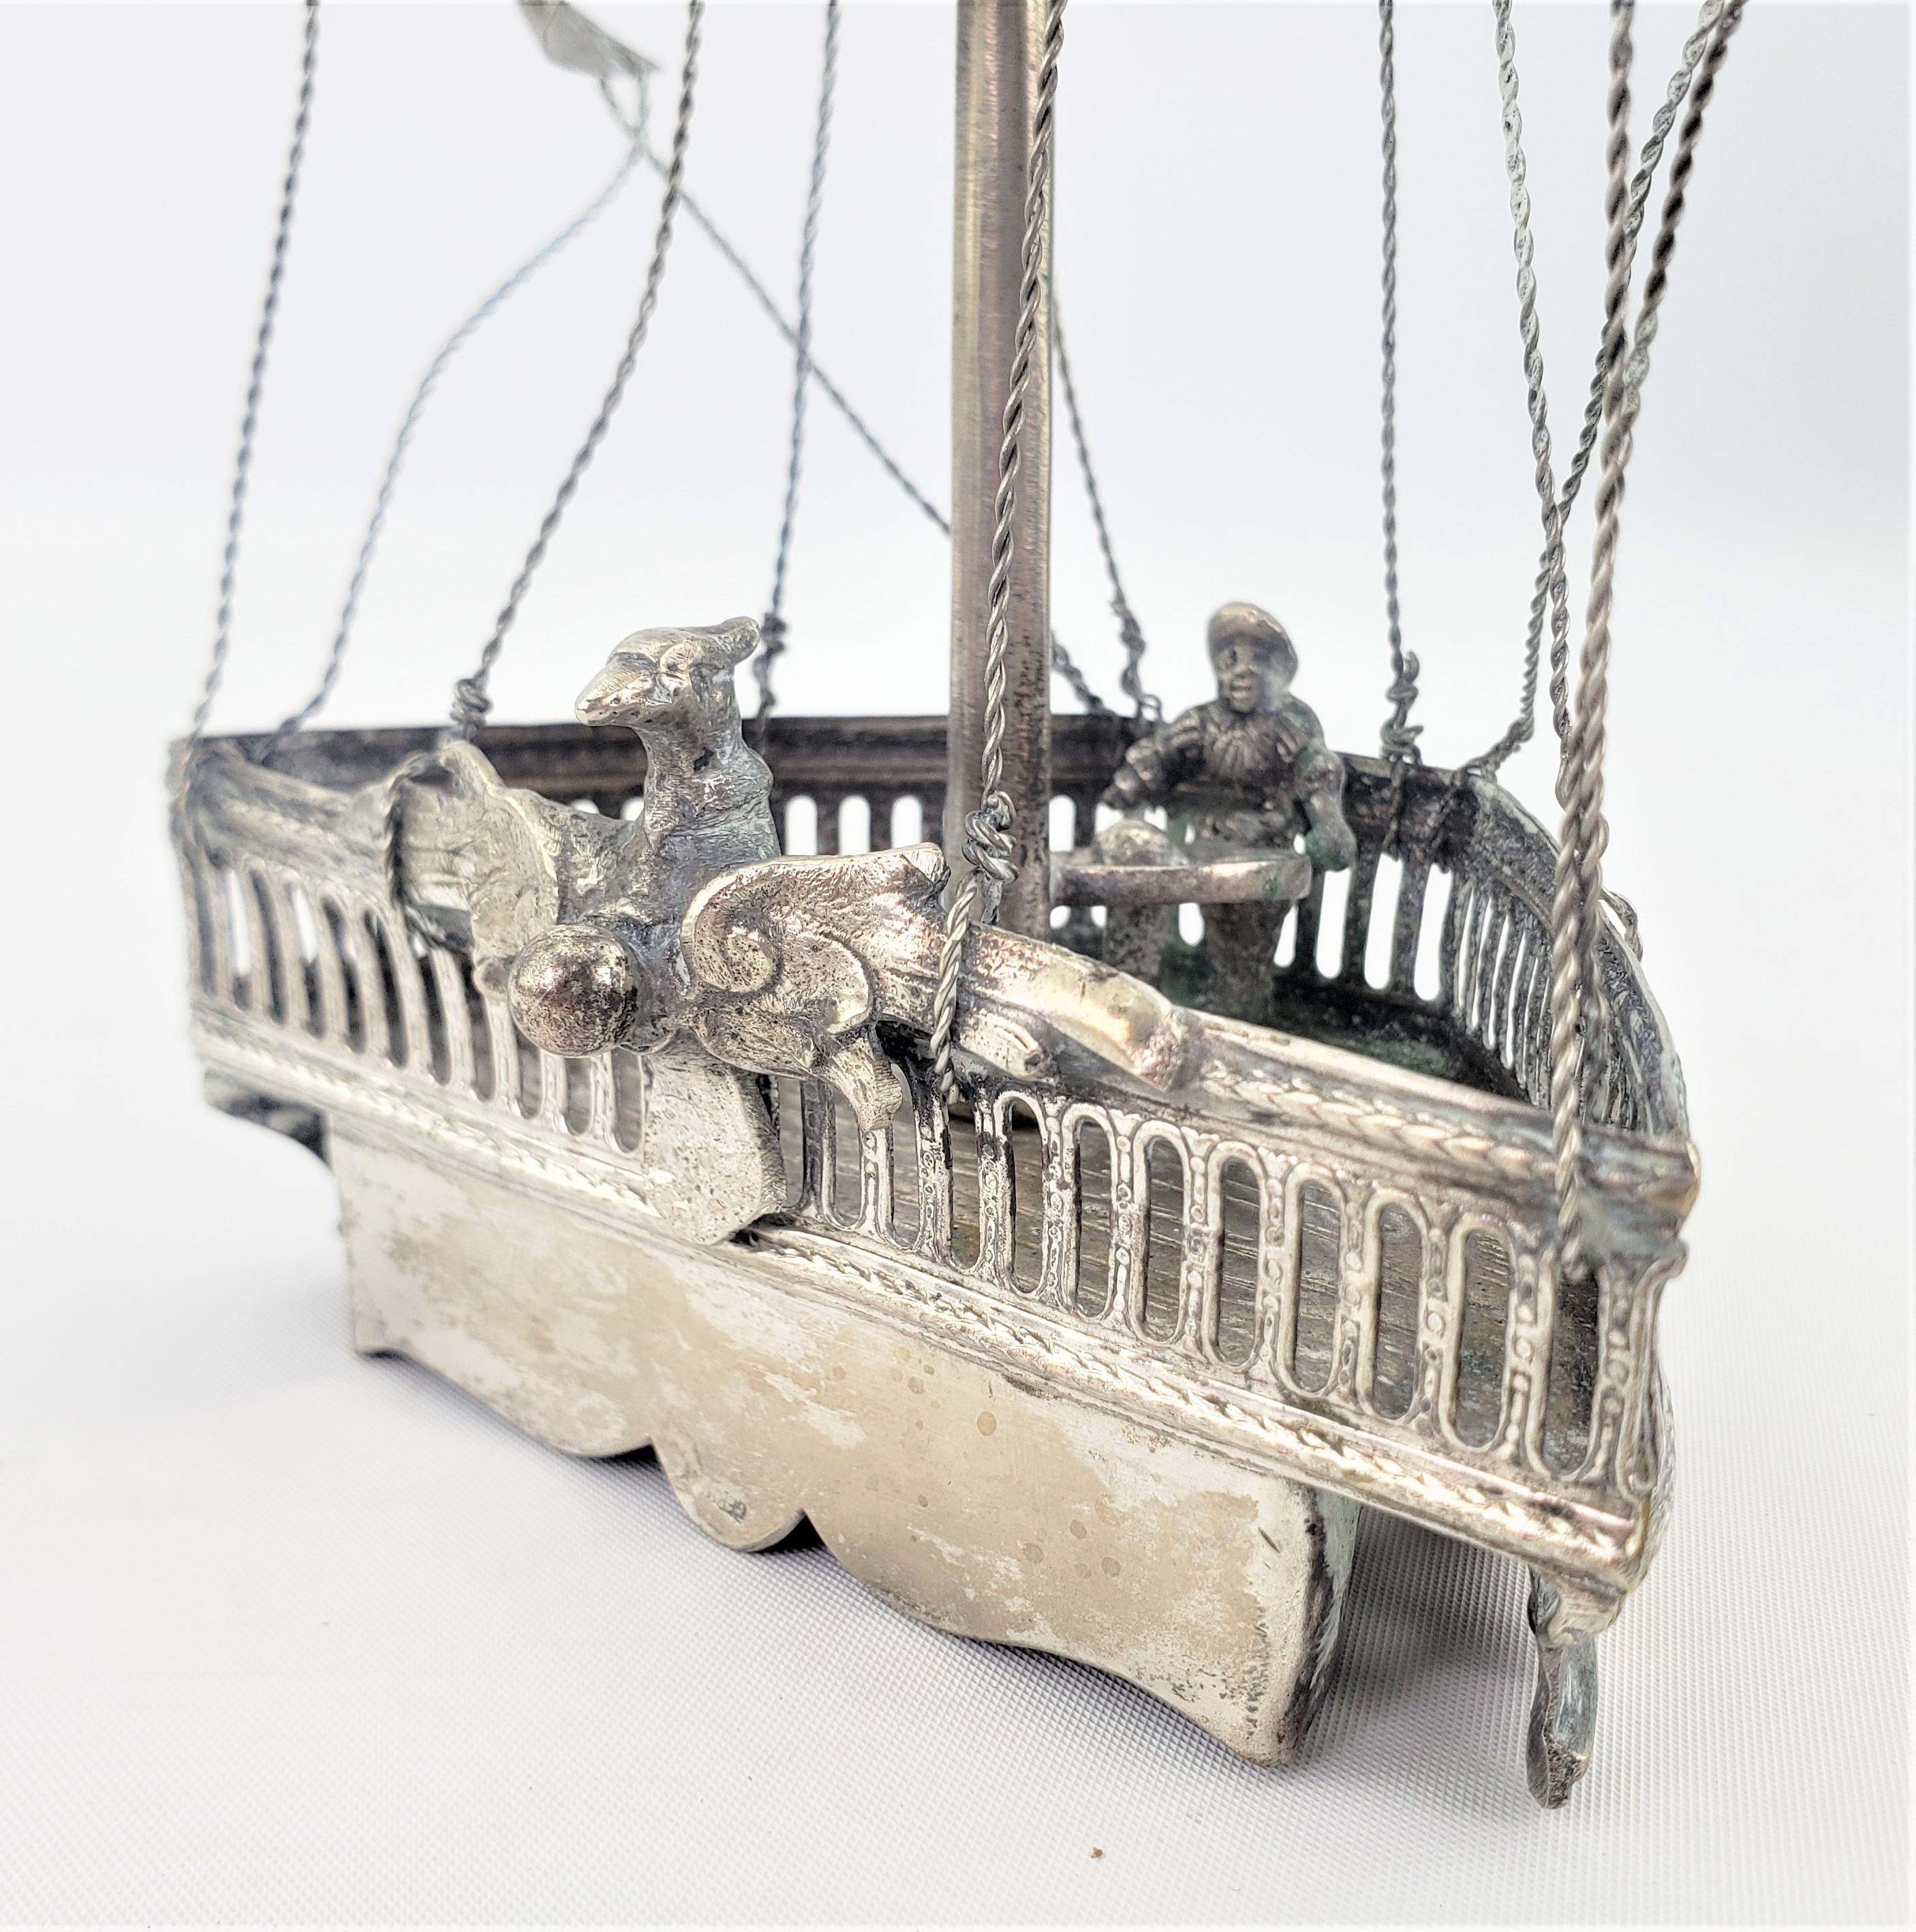 Antique Plated Cast Nef Viking Styled Ship or Galleon with Inset Cabochon Stones 9